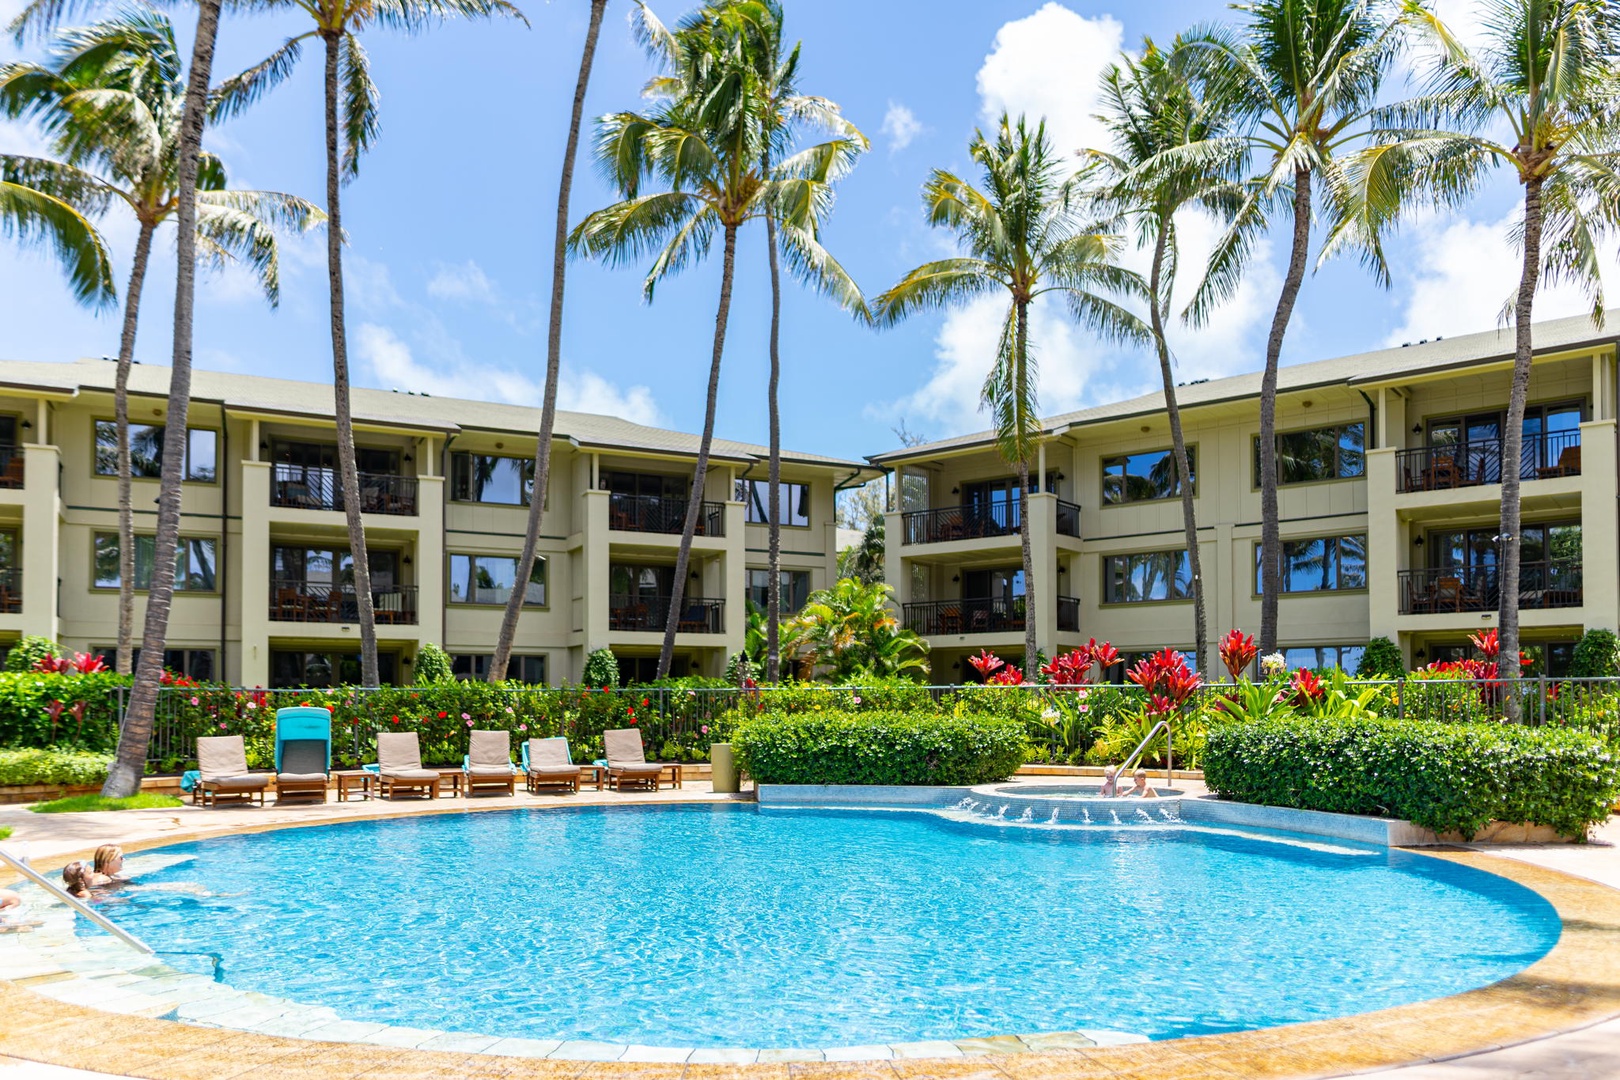 Kahuku Vacation Rentals, Turtle Bay Villas 112 - Ocean Villa pool, reserved just for Villa guests and owners